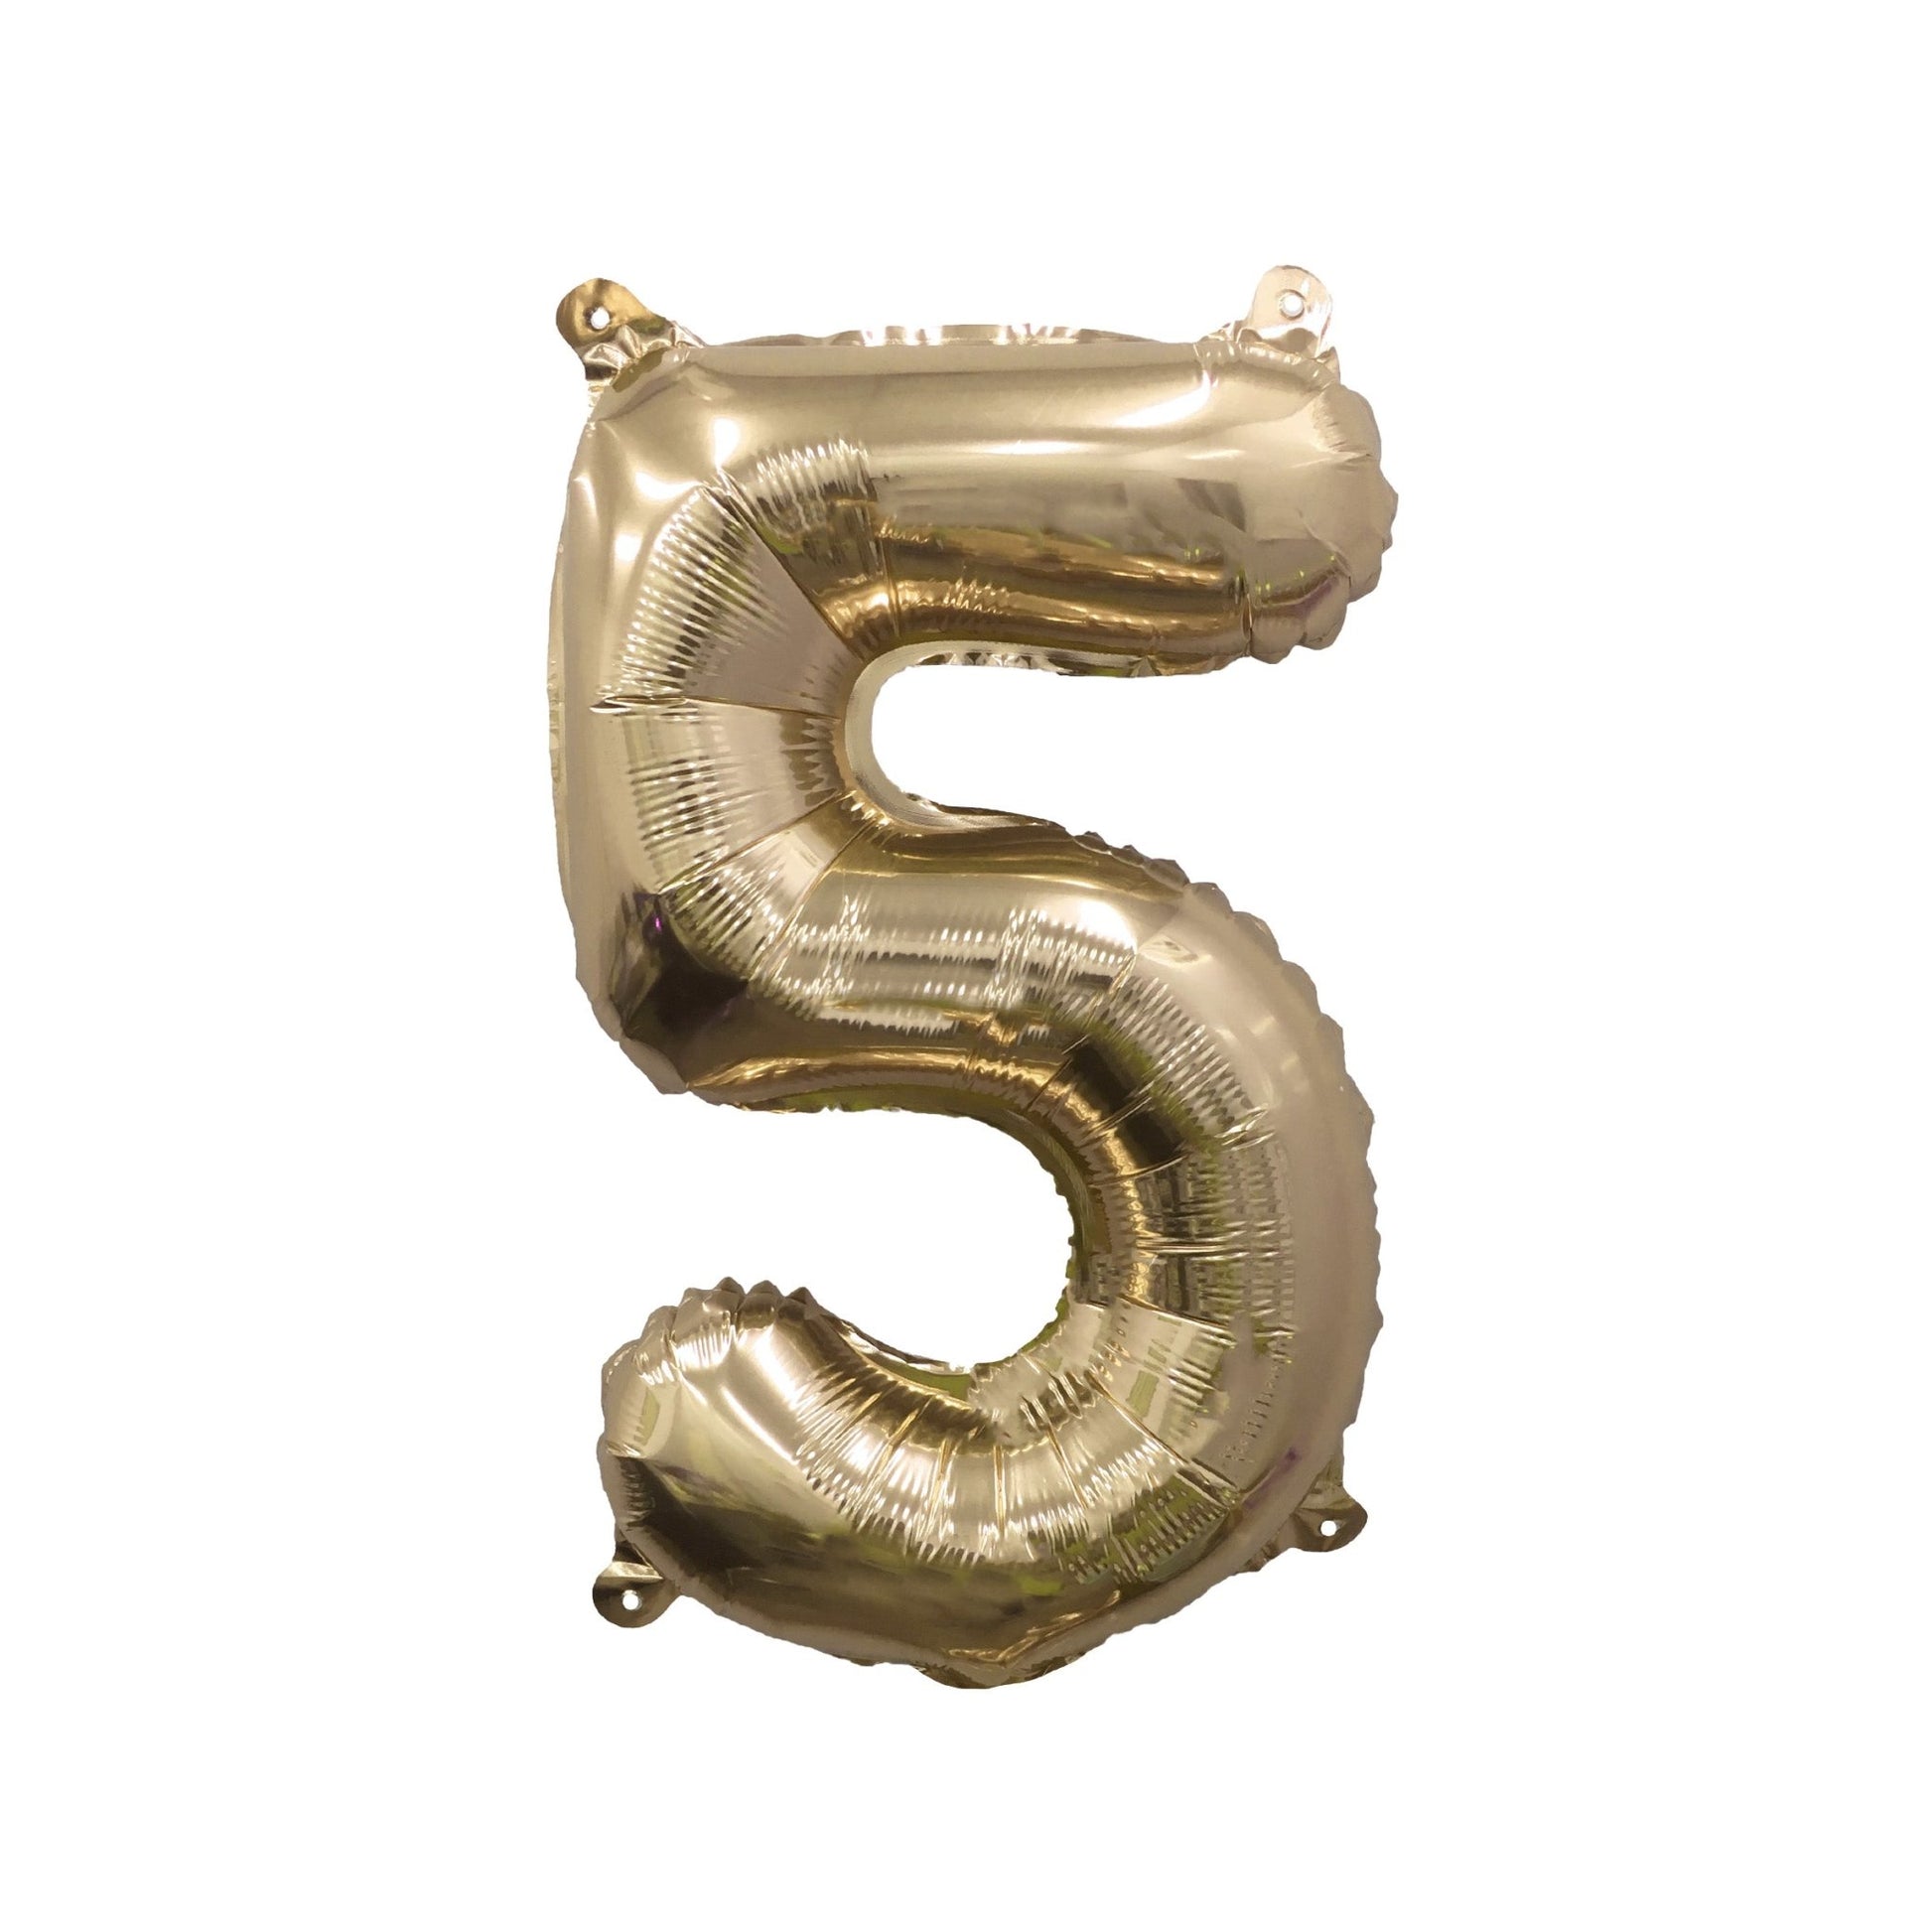 Giant Gold Mylar Foil Number Balloons (32 Inches) - Ellie's Party Supply